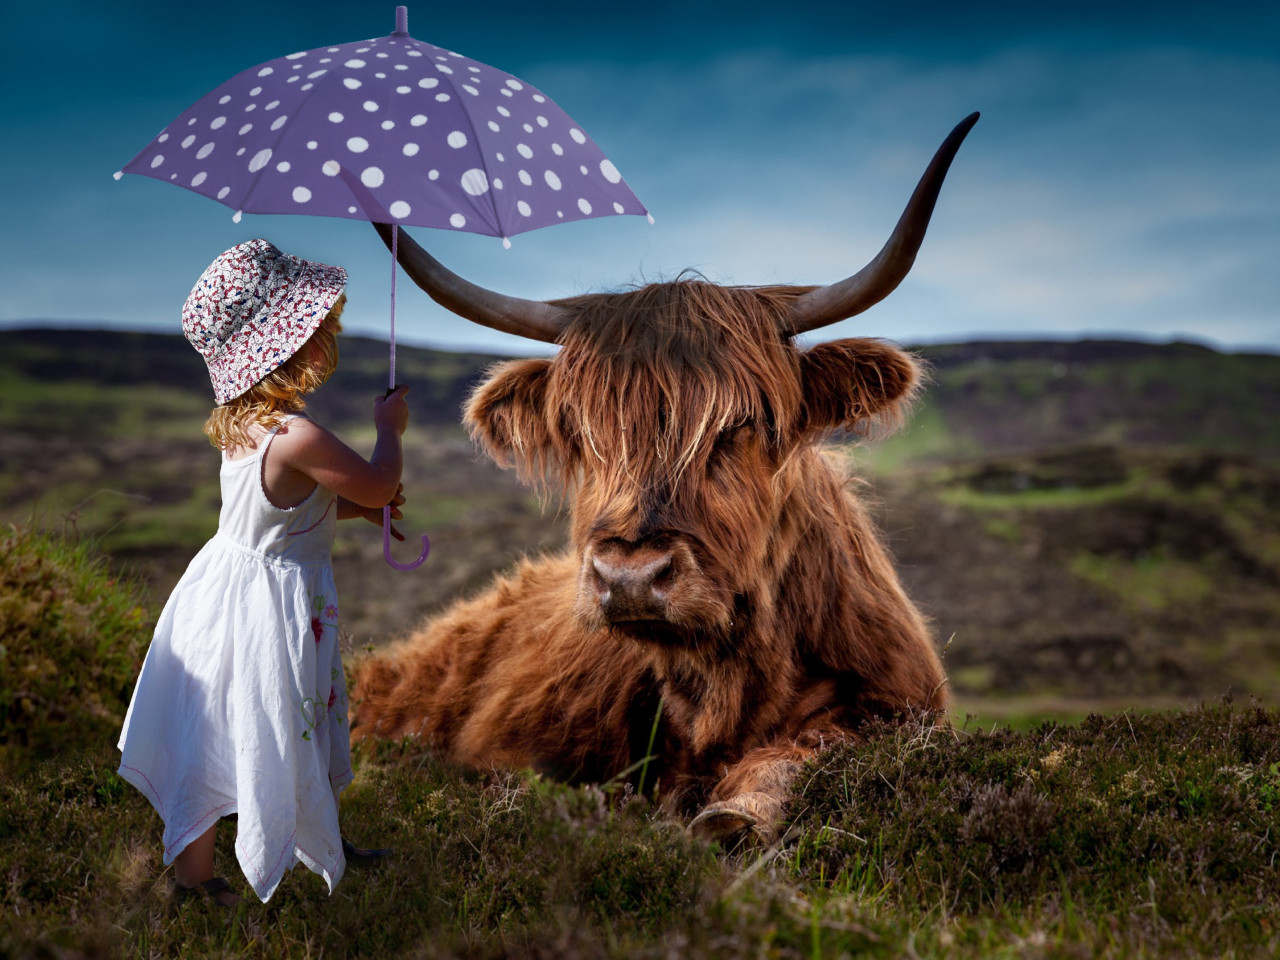 Child with the umbrella and the funny cow wallpaper 1280x960